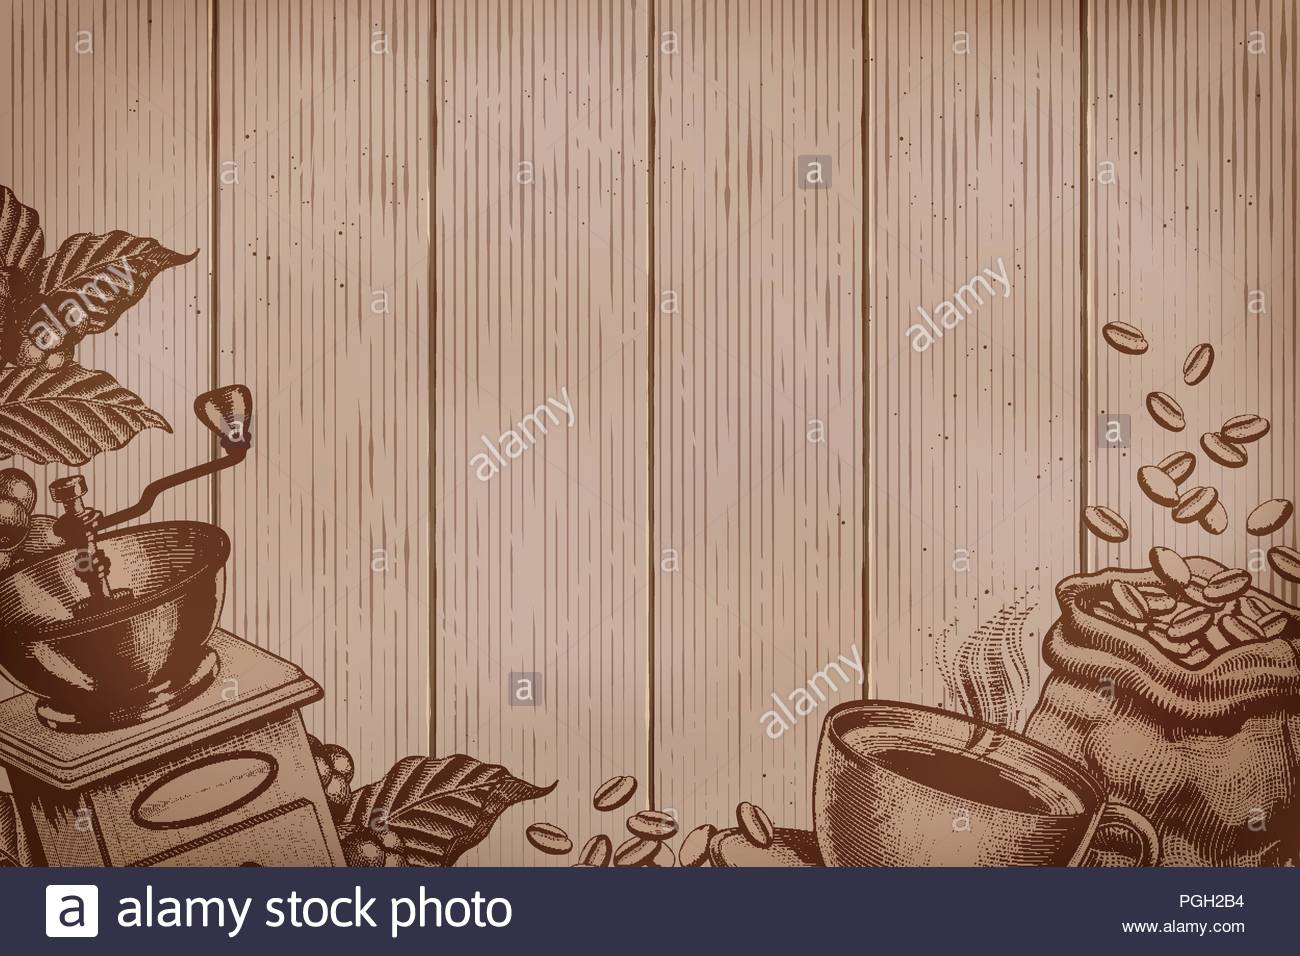 Coffee Background On Wood Planks In Engraving Style Stock Vector